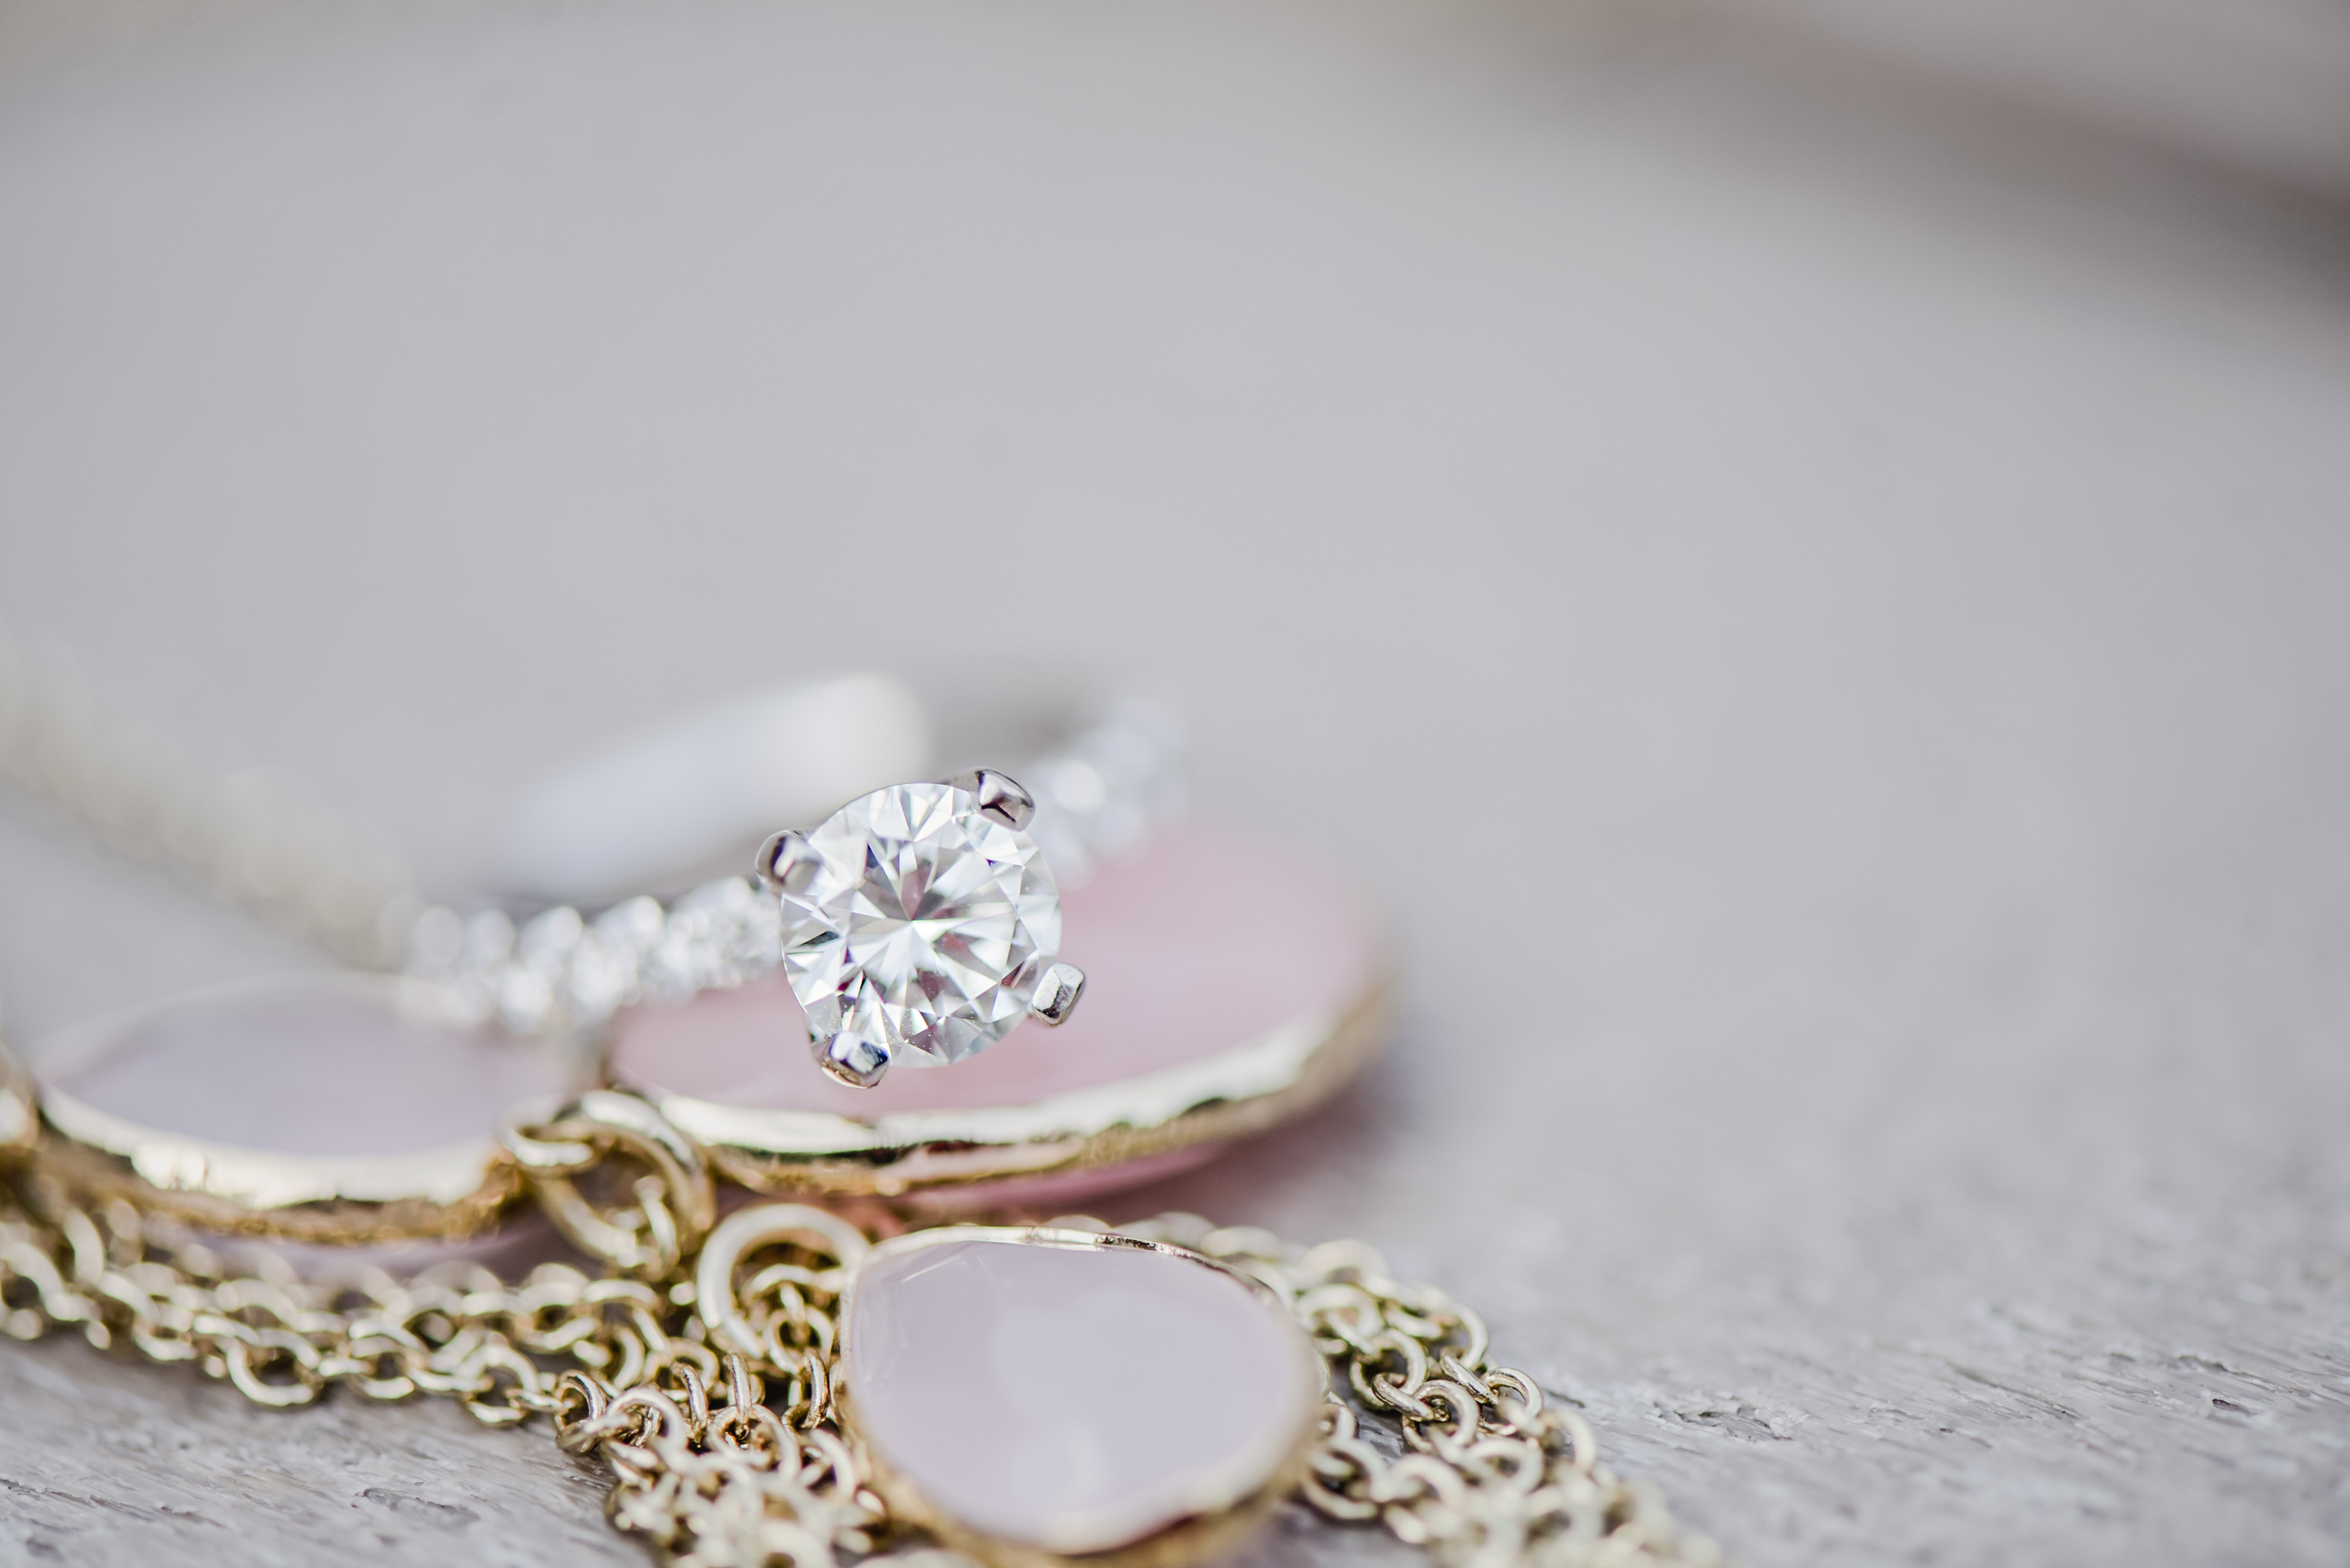 Gorgeous round diamond solitaire flanked on either side by pave' diamonds set in white gold. This engagement ring looks beautiful set agains the pink and gold. Summer engagement session in the woods by Kari Dawson Photography.